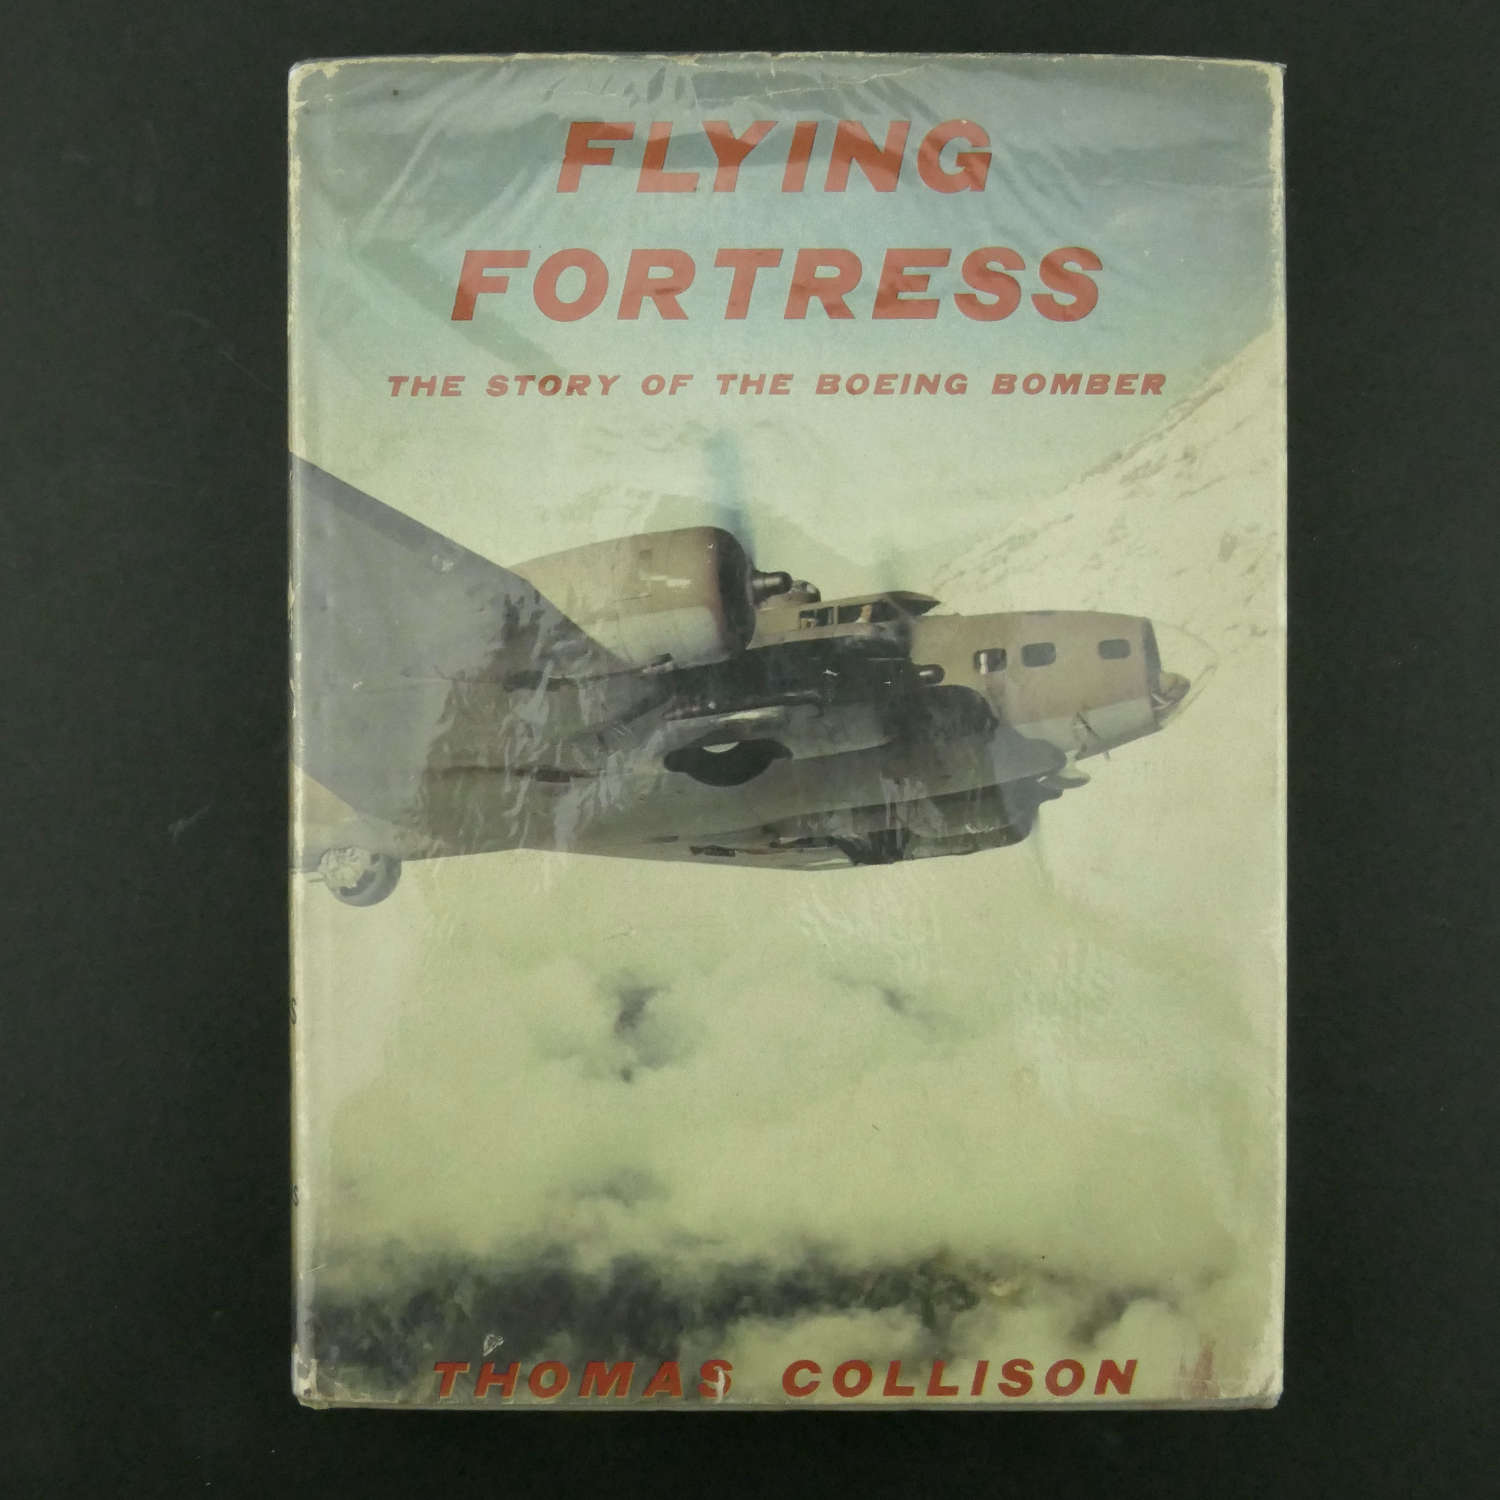 Flying Fortress - The Story of the Boeing Bomber